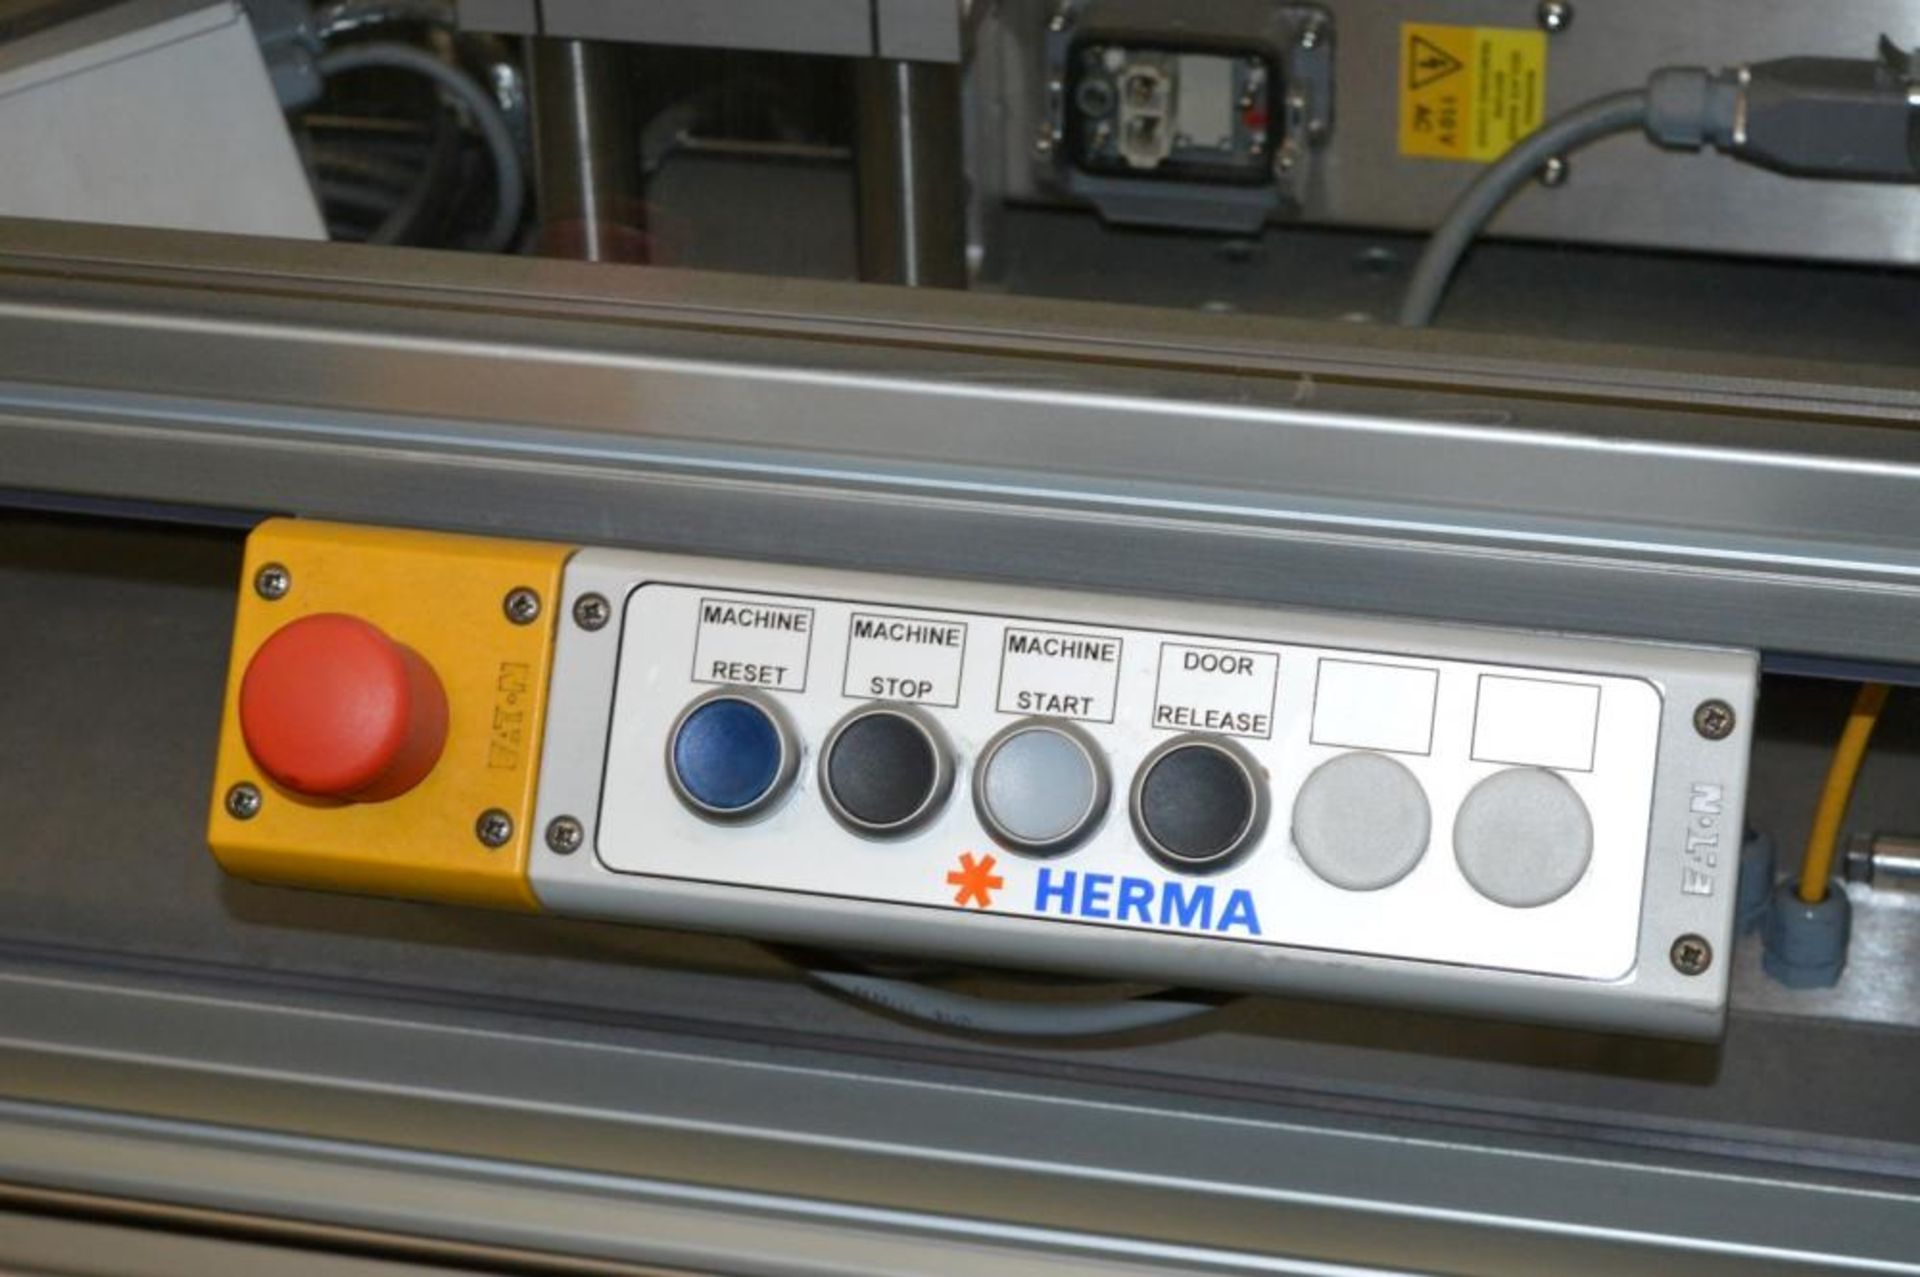 1 x Herma Infrared Label Applicating Heat Tunnel - Manufactured in 2015 - Designed For Applying - Image 23 of 30